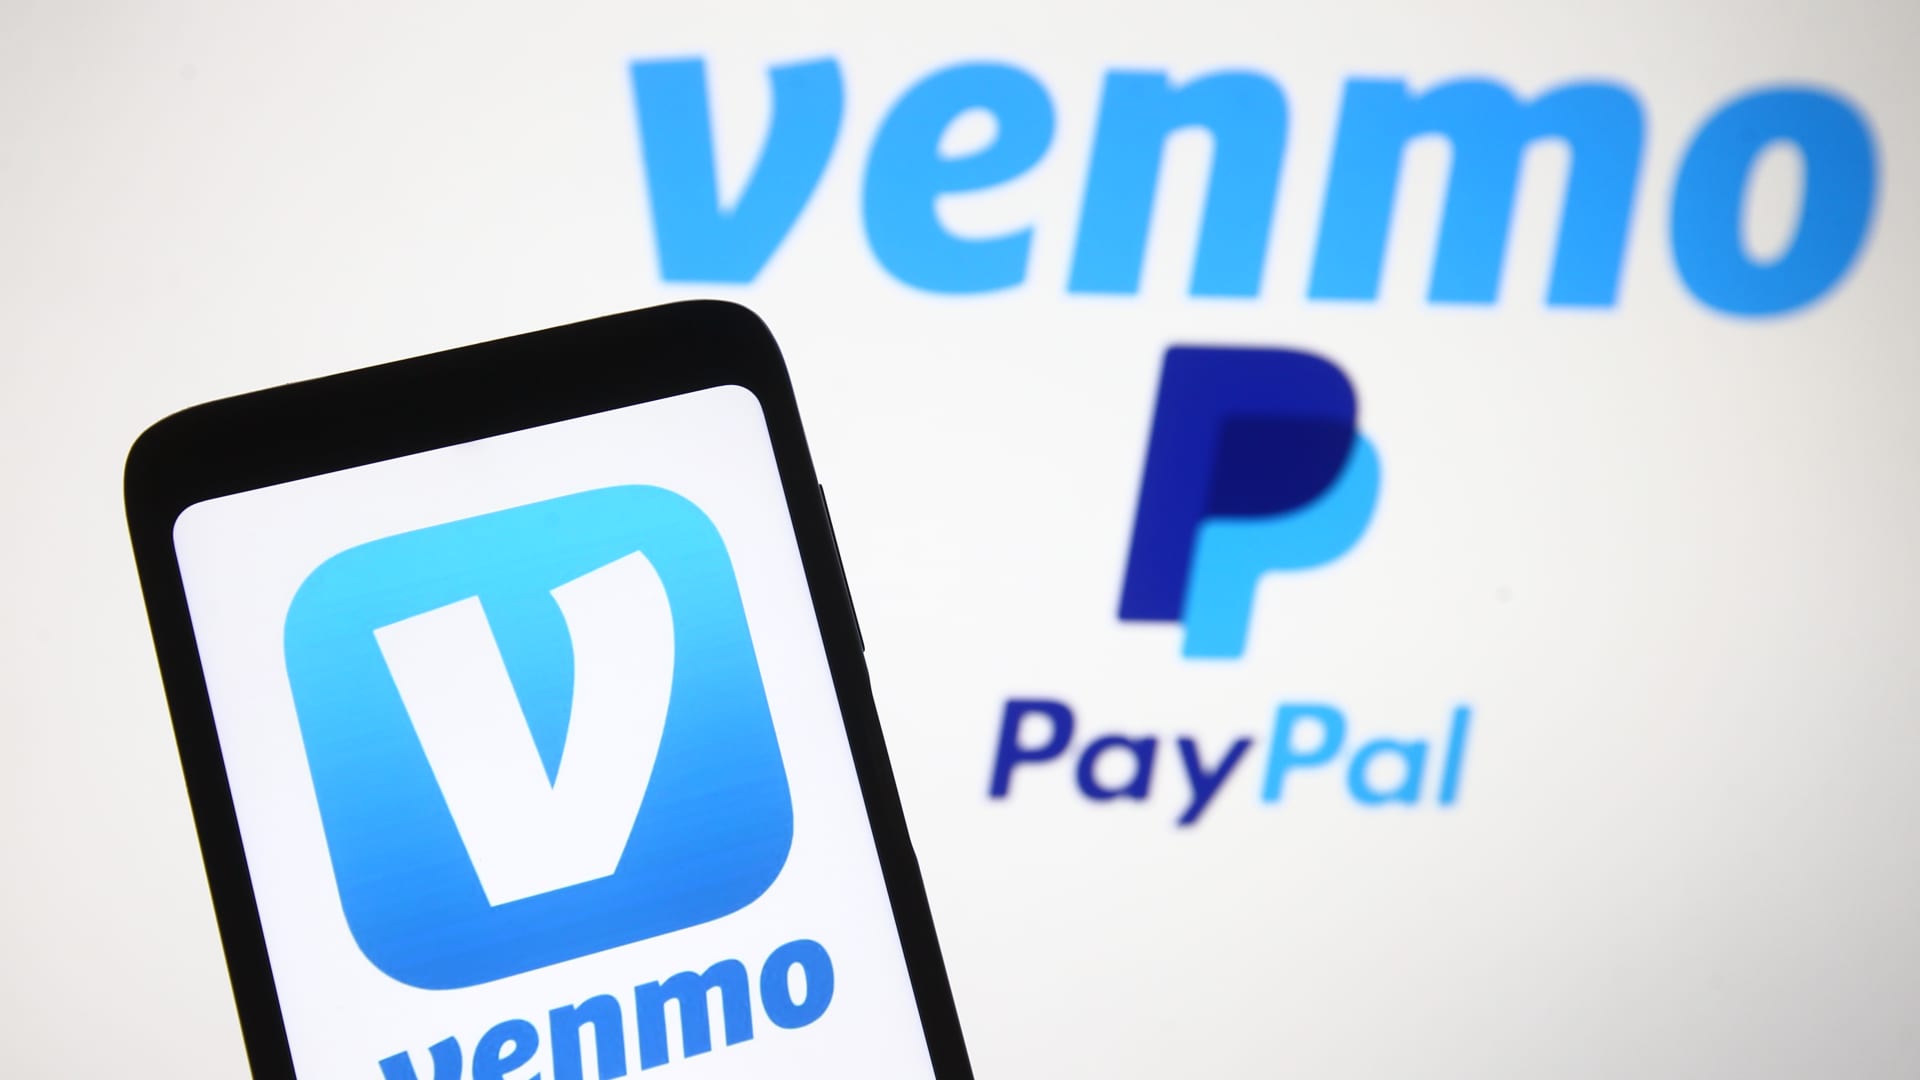 PayPal shares slide after Amazon drops Venmo as payment option